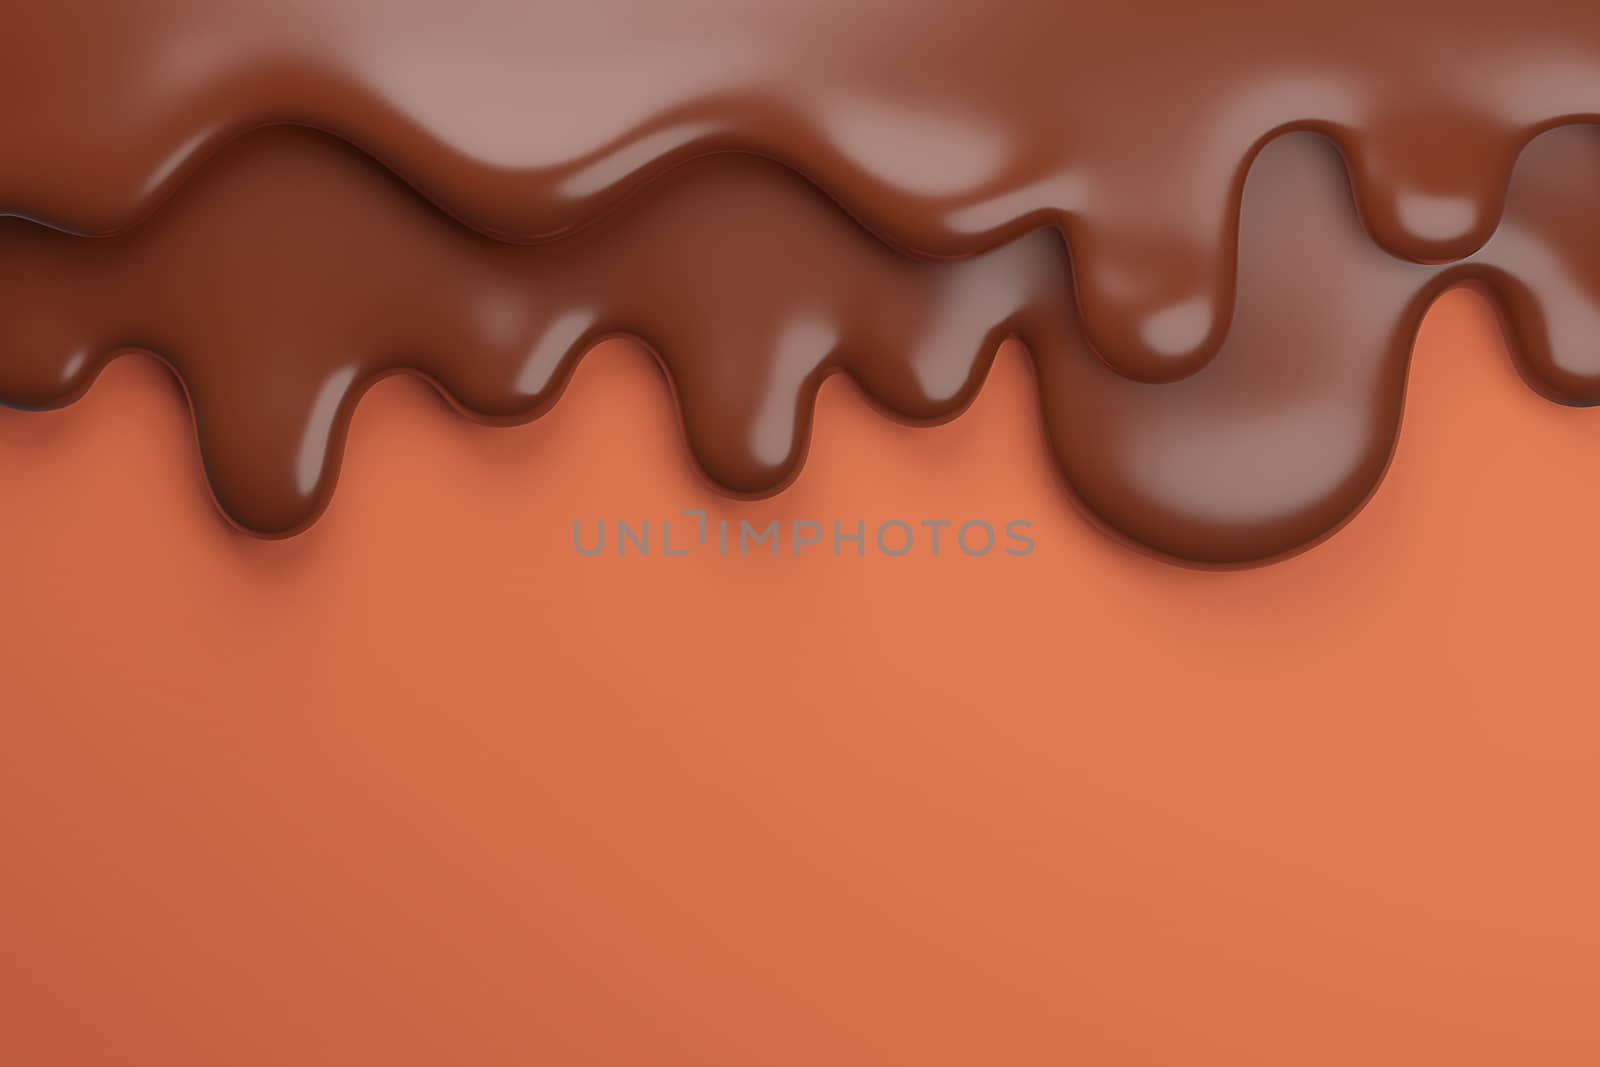 Melted milk brown chocolate flow down.,3d model and illustration. by anotestocker